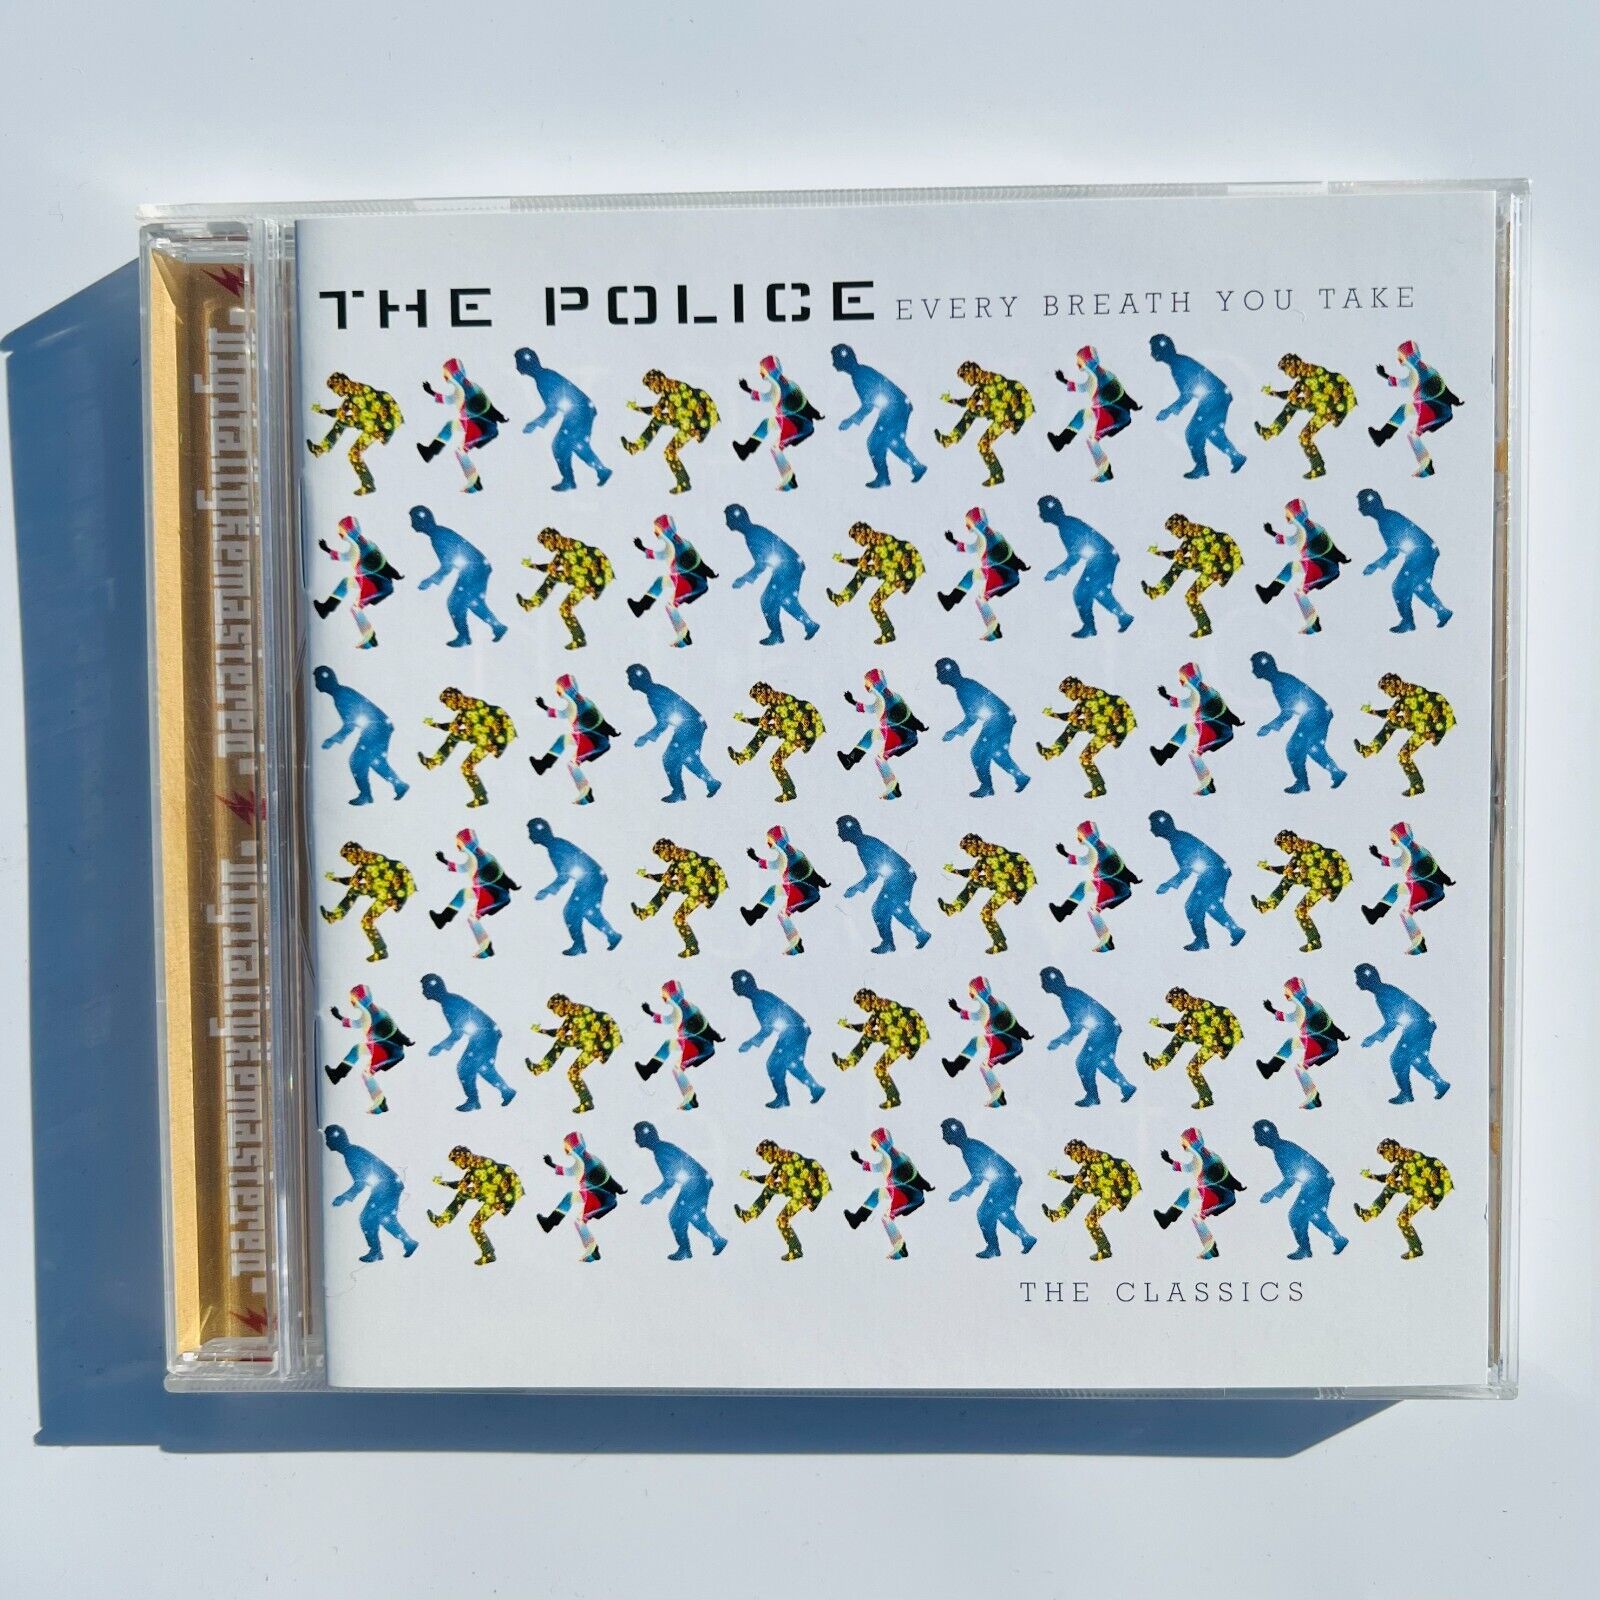 The Police - CD - Every Breath You Take